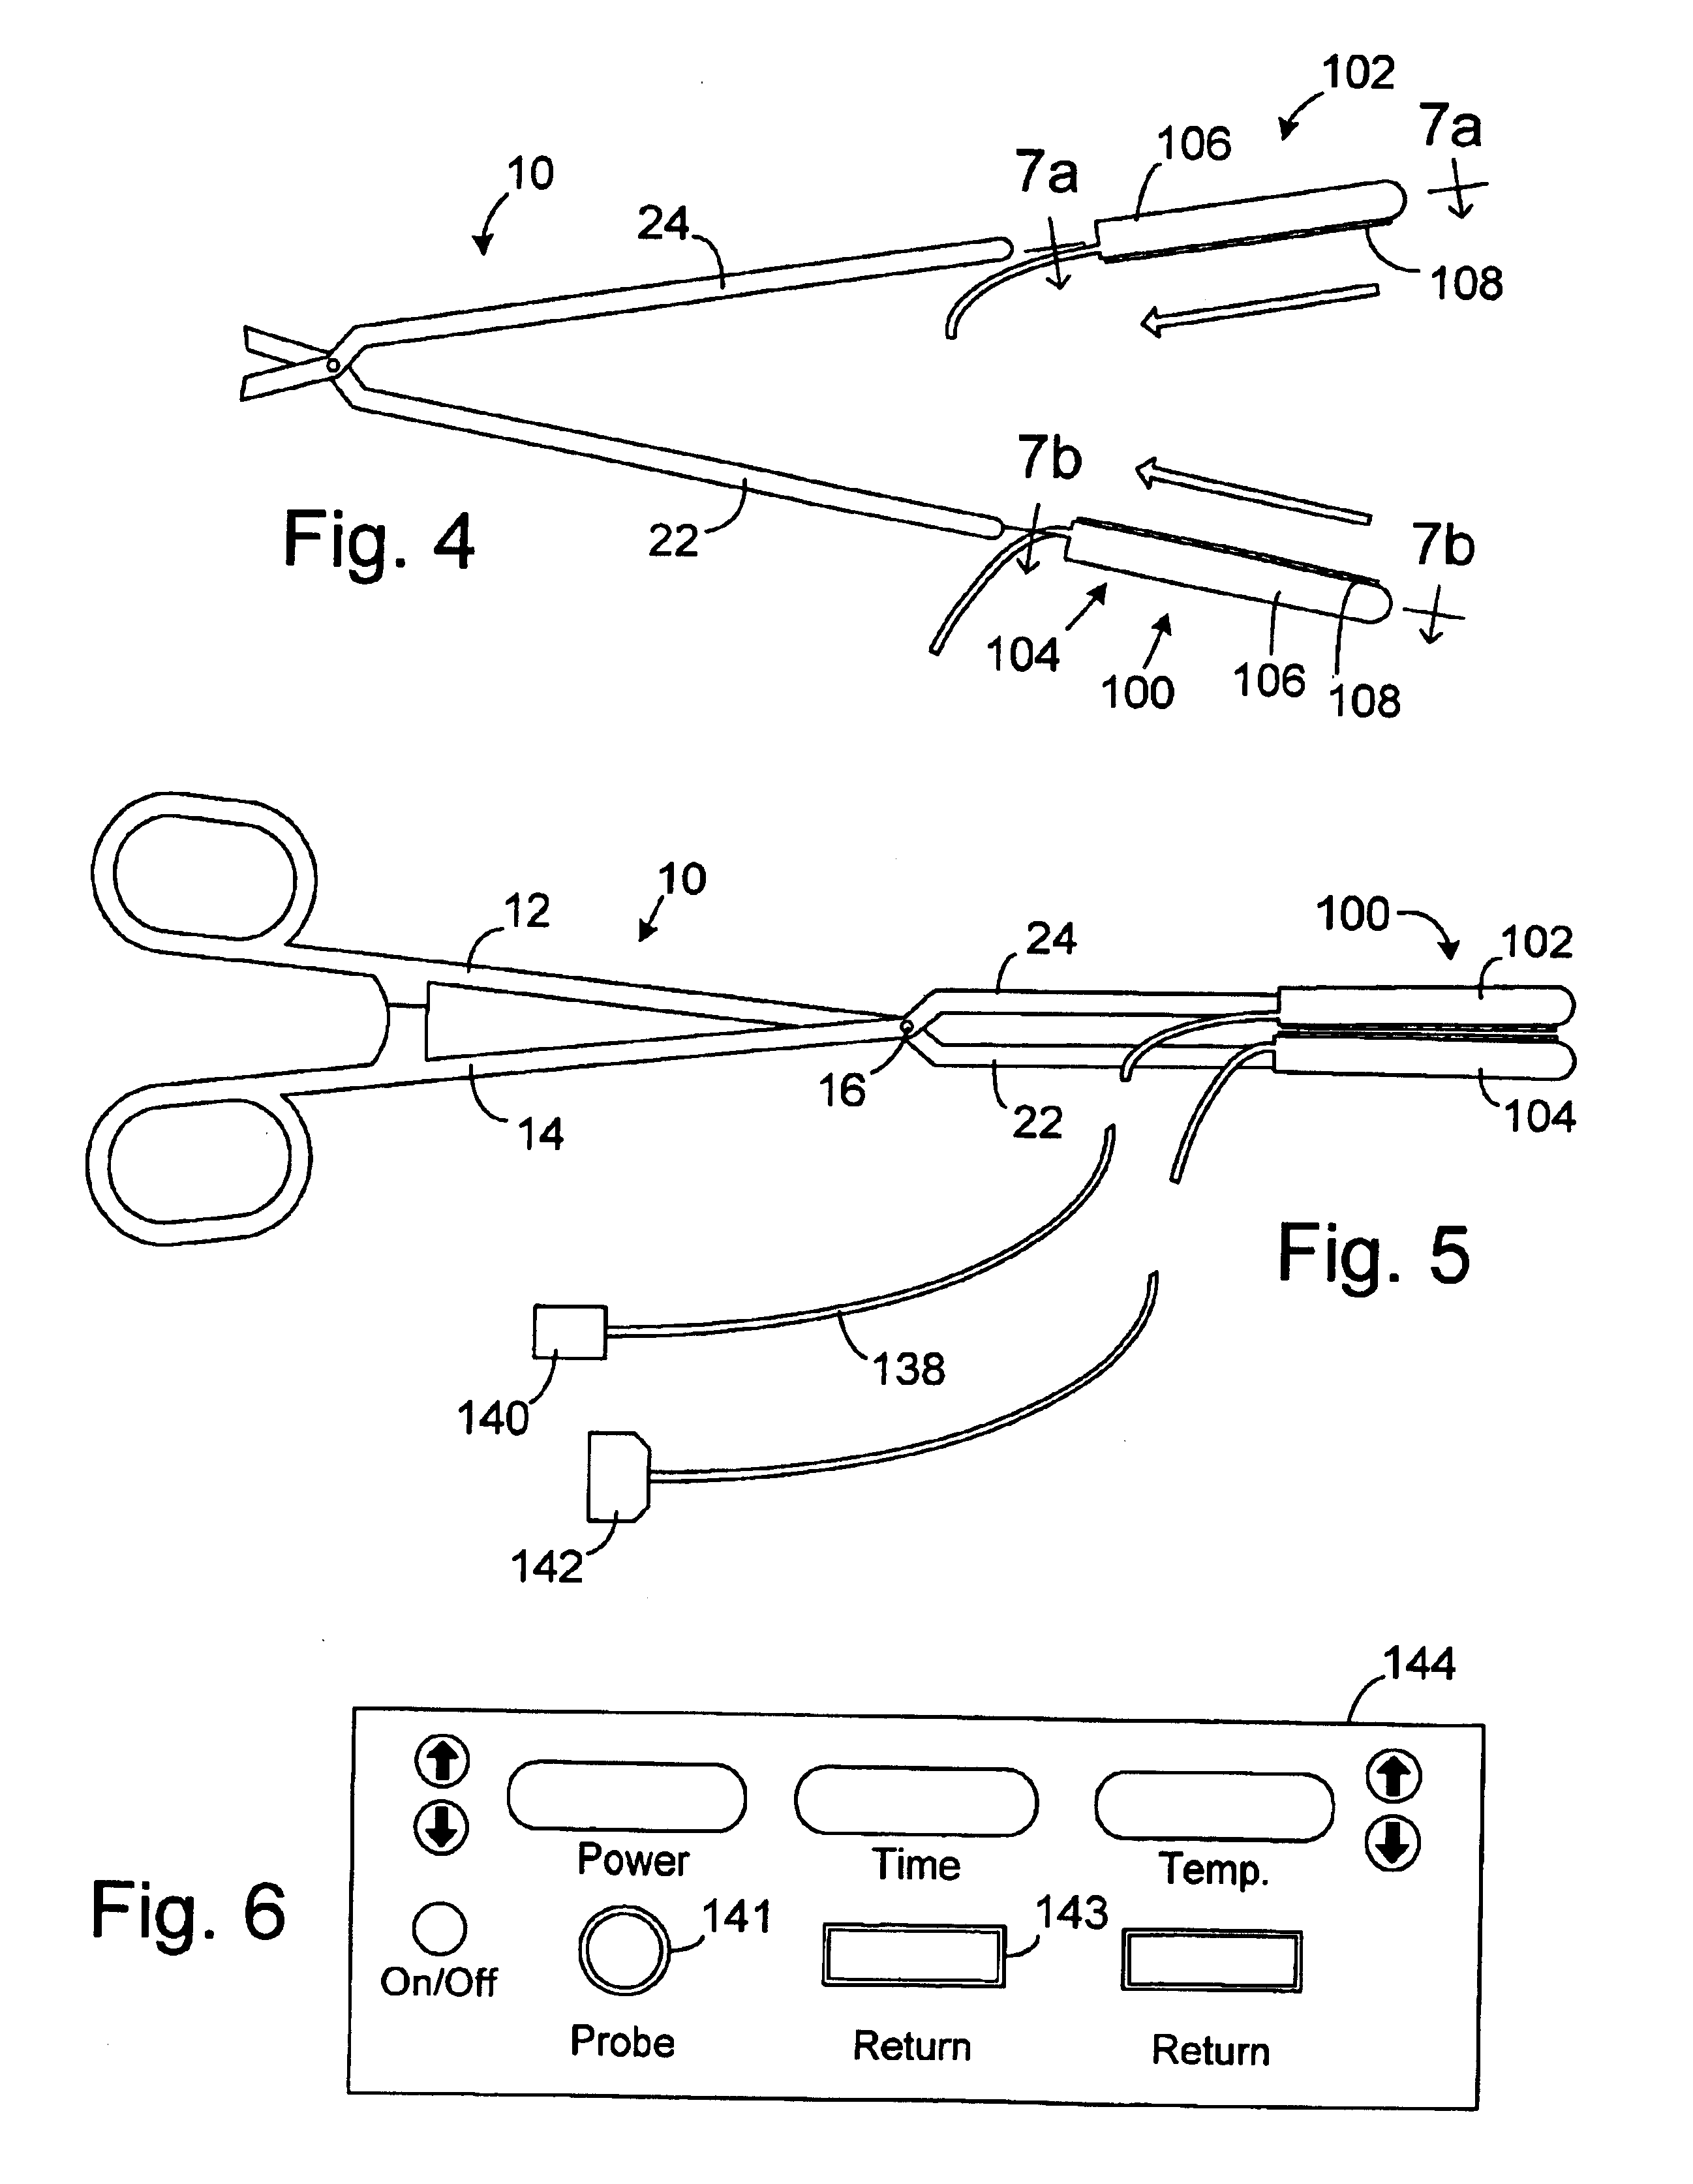 Clamp having at least one malleable clamp member and surgical method employing the same